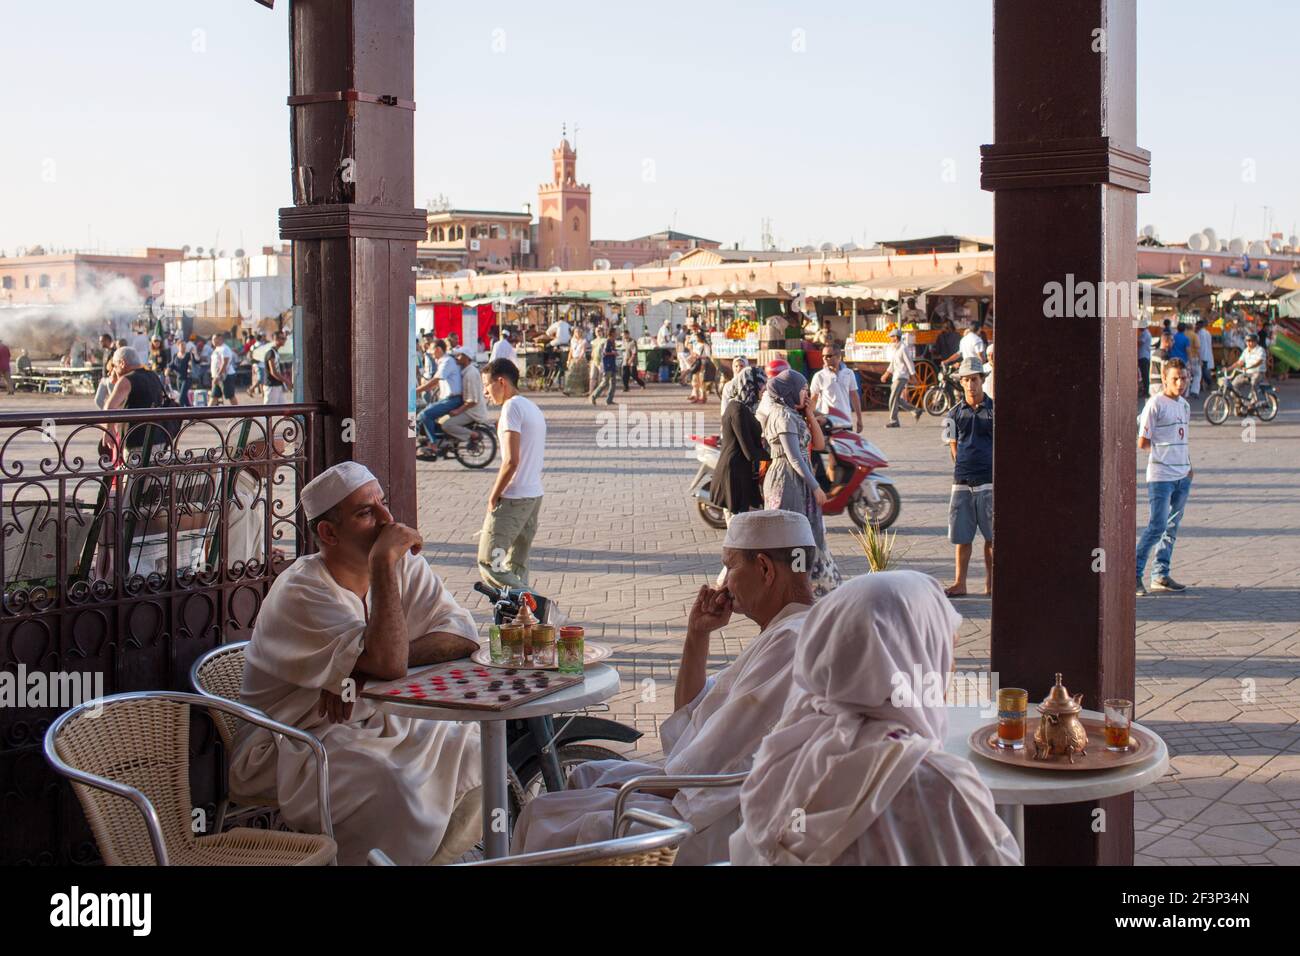 Two men playing checkers game in a cafe in front of Jamaa El Fna (also Jemaa el-Fnaa) market square in Marrakesh, Morocco Stock Photo